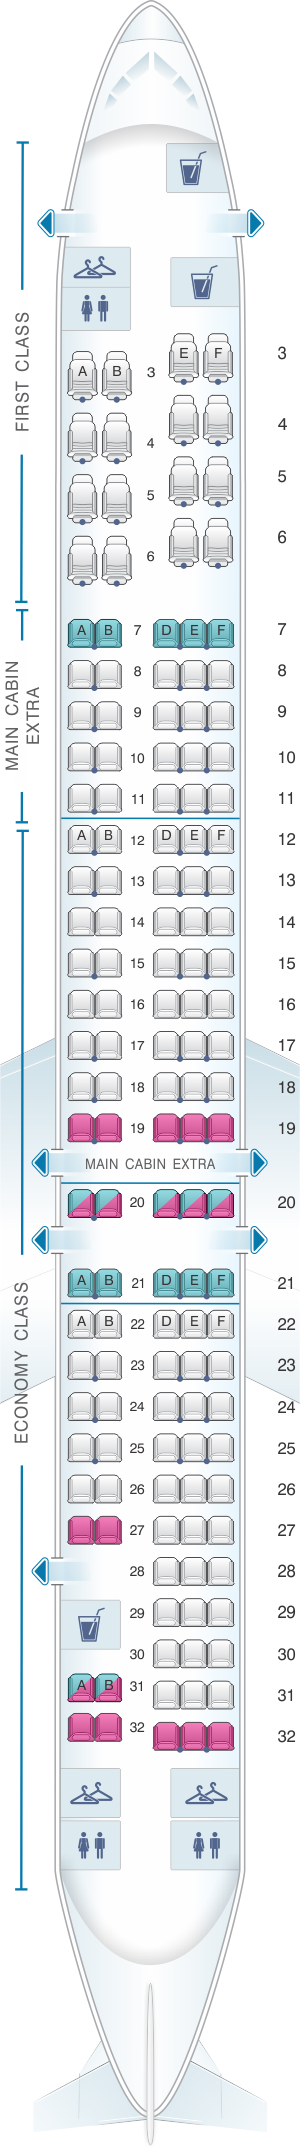 Delta Mcdonnell Douglas Md 80 Seating Chart